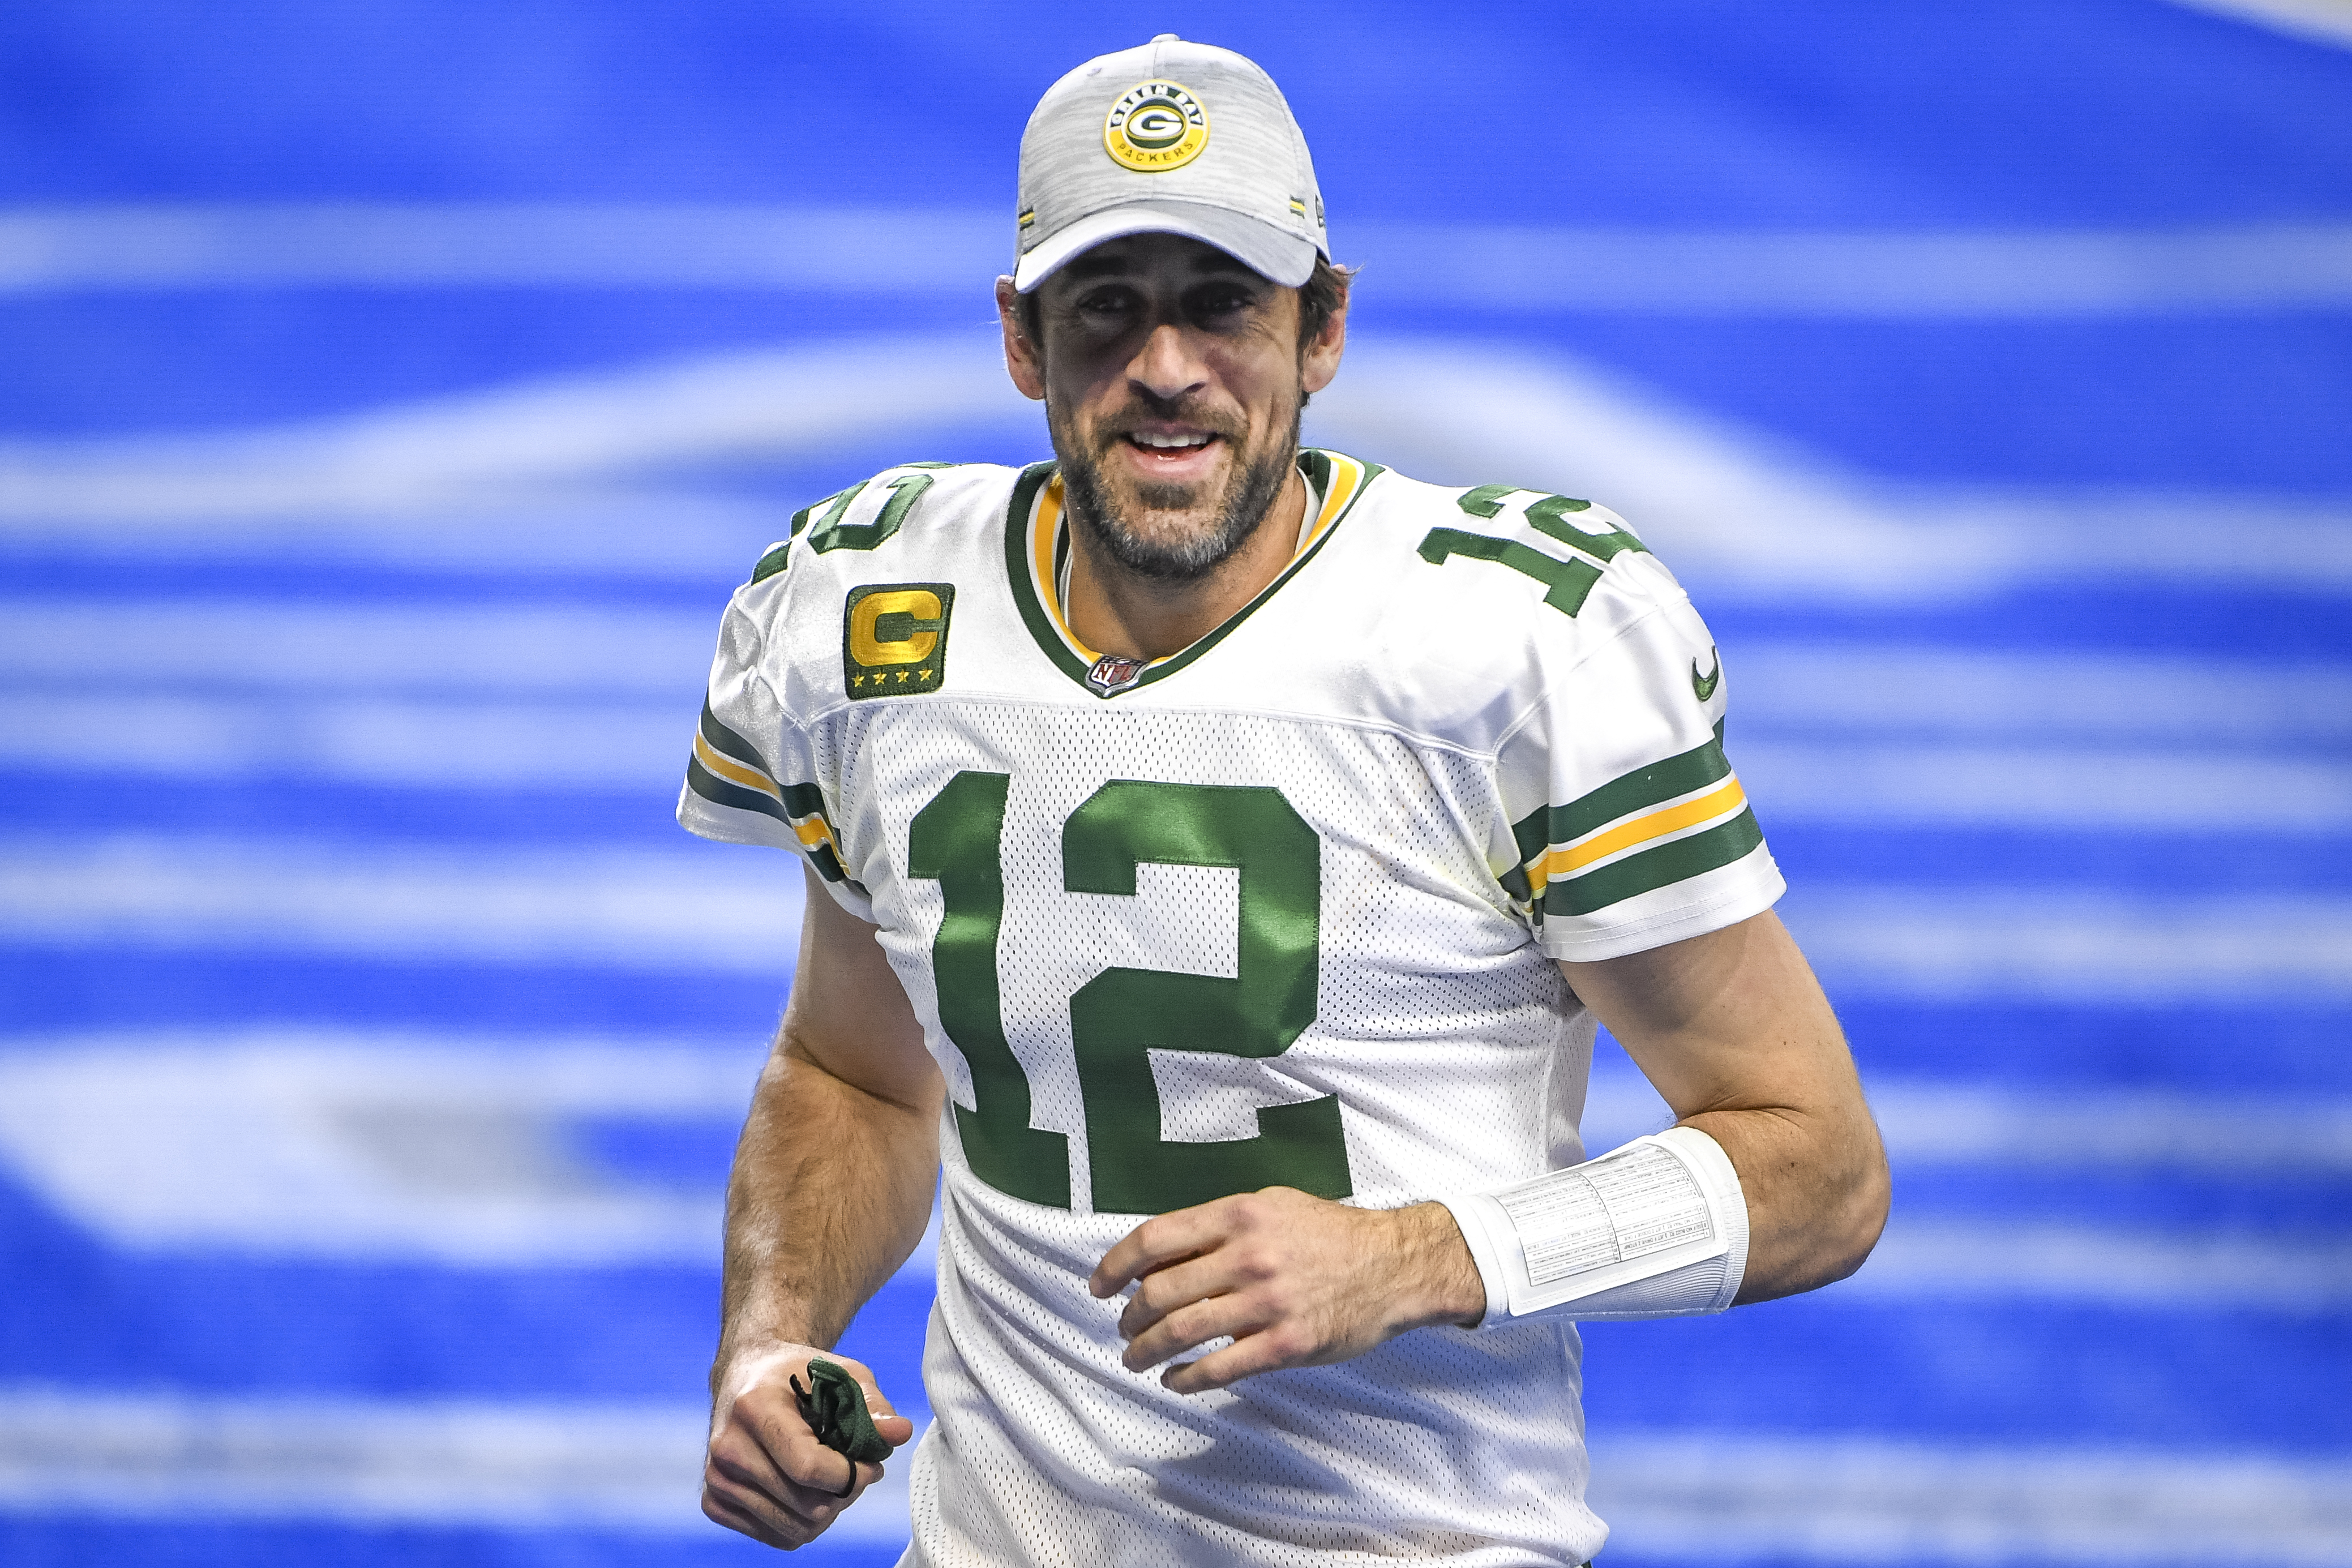 Aaron Rodgers Says He's Spent Offseason Working on 'Positivity' amid Trade Rumors